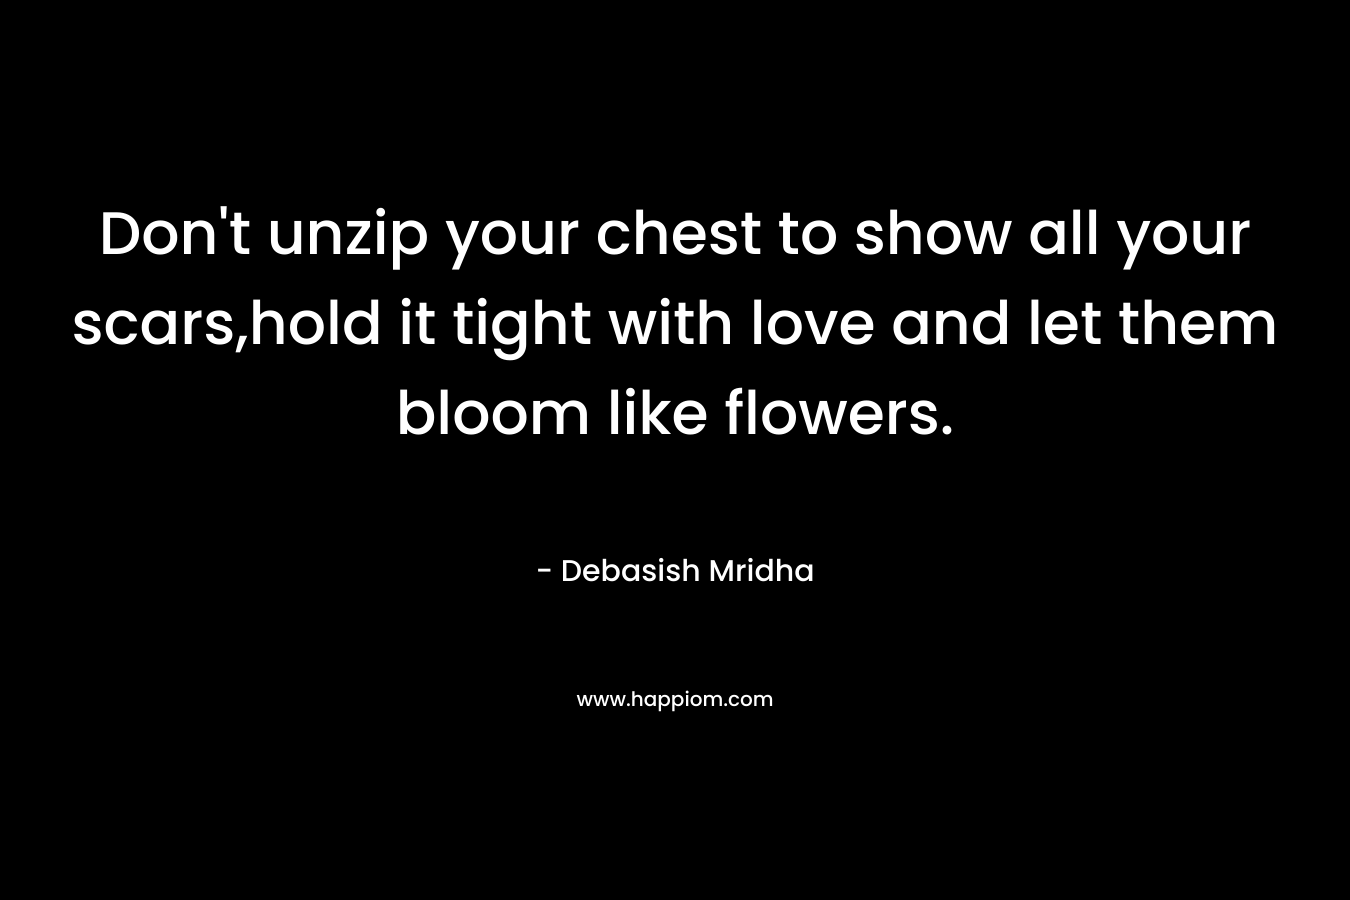 Don't unzip your chest to show all your scars,hold it tight with love and let them bloom like flowers.